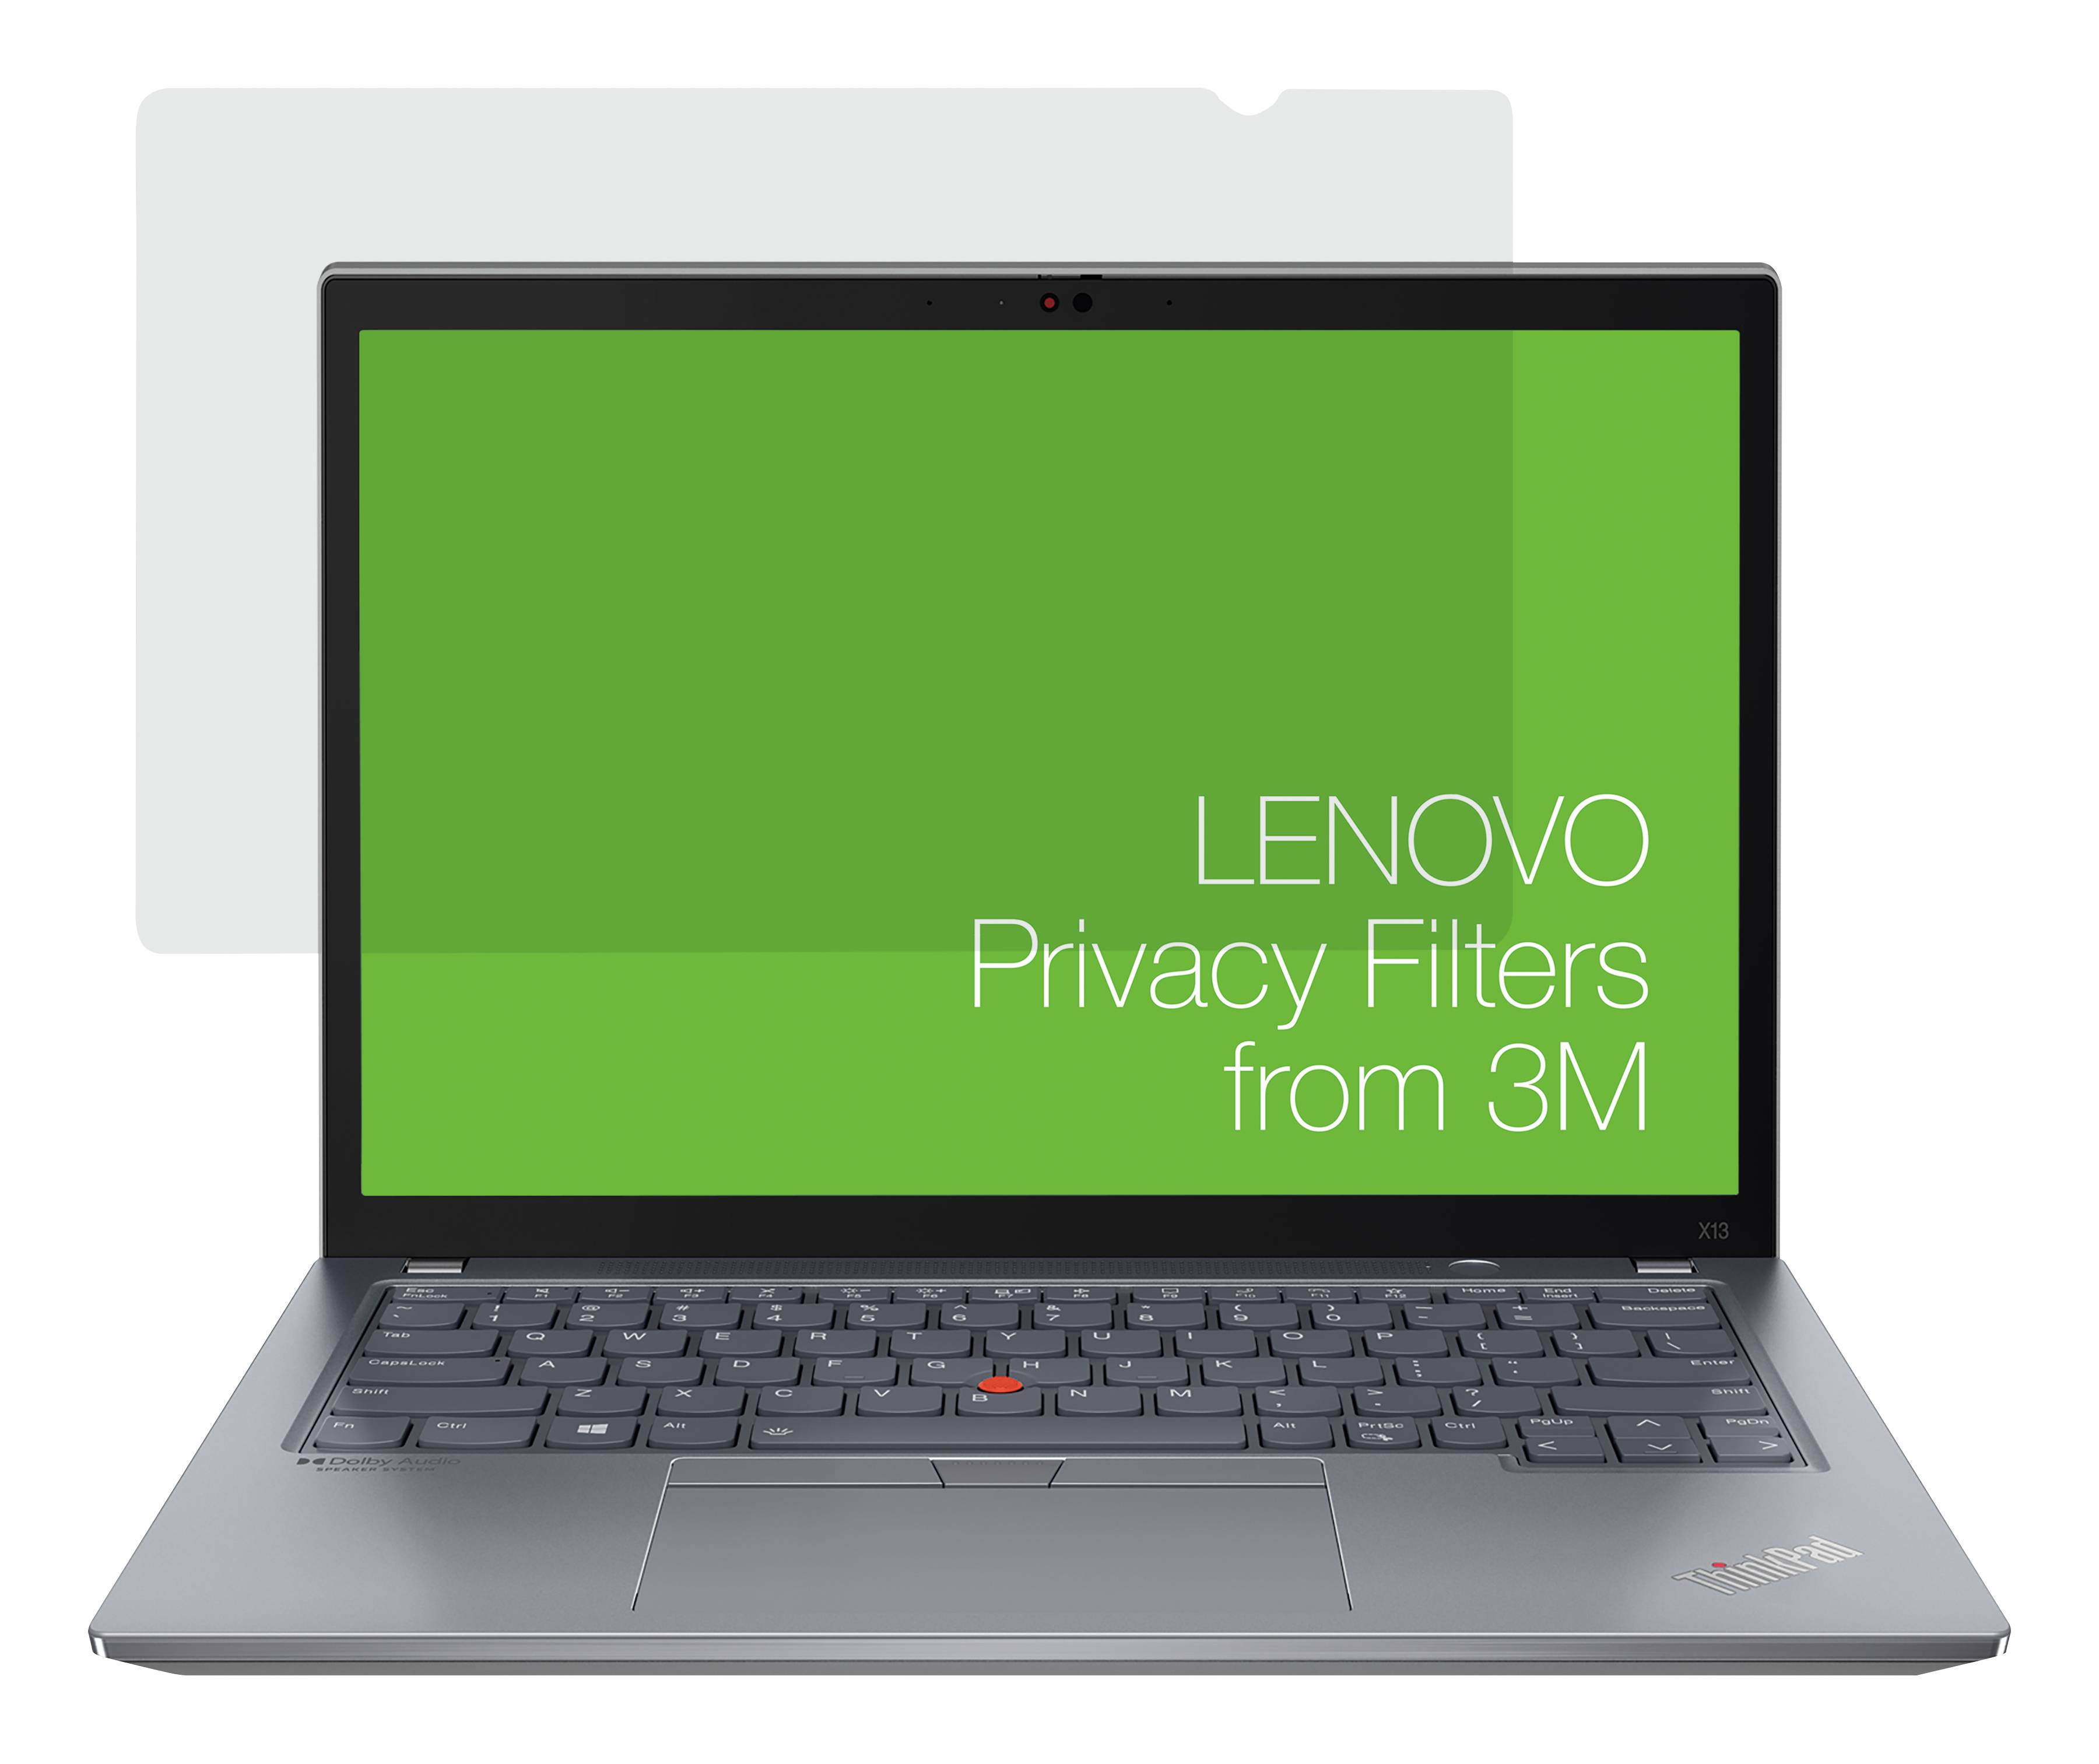 Rca Informatique - image du produit : LENOVO 13.3 INCH PRIVACY FILTER FOR X13 GEN2 WITH COMPLY ATTACHM